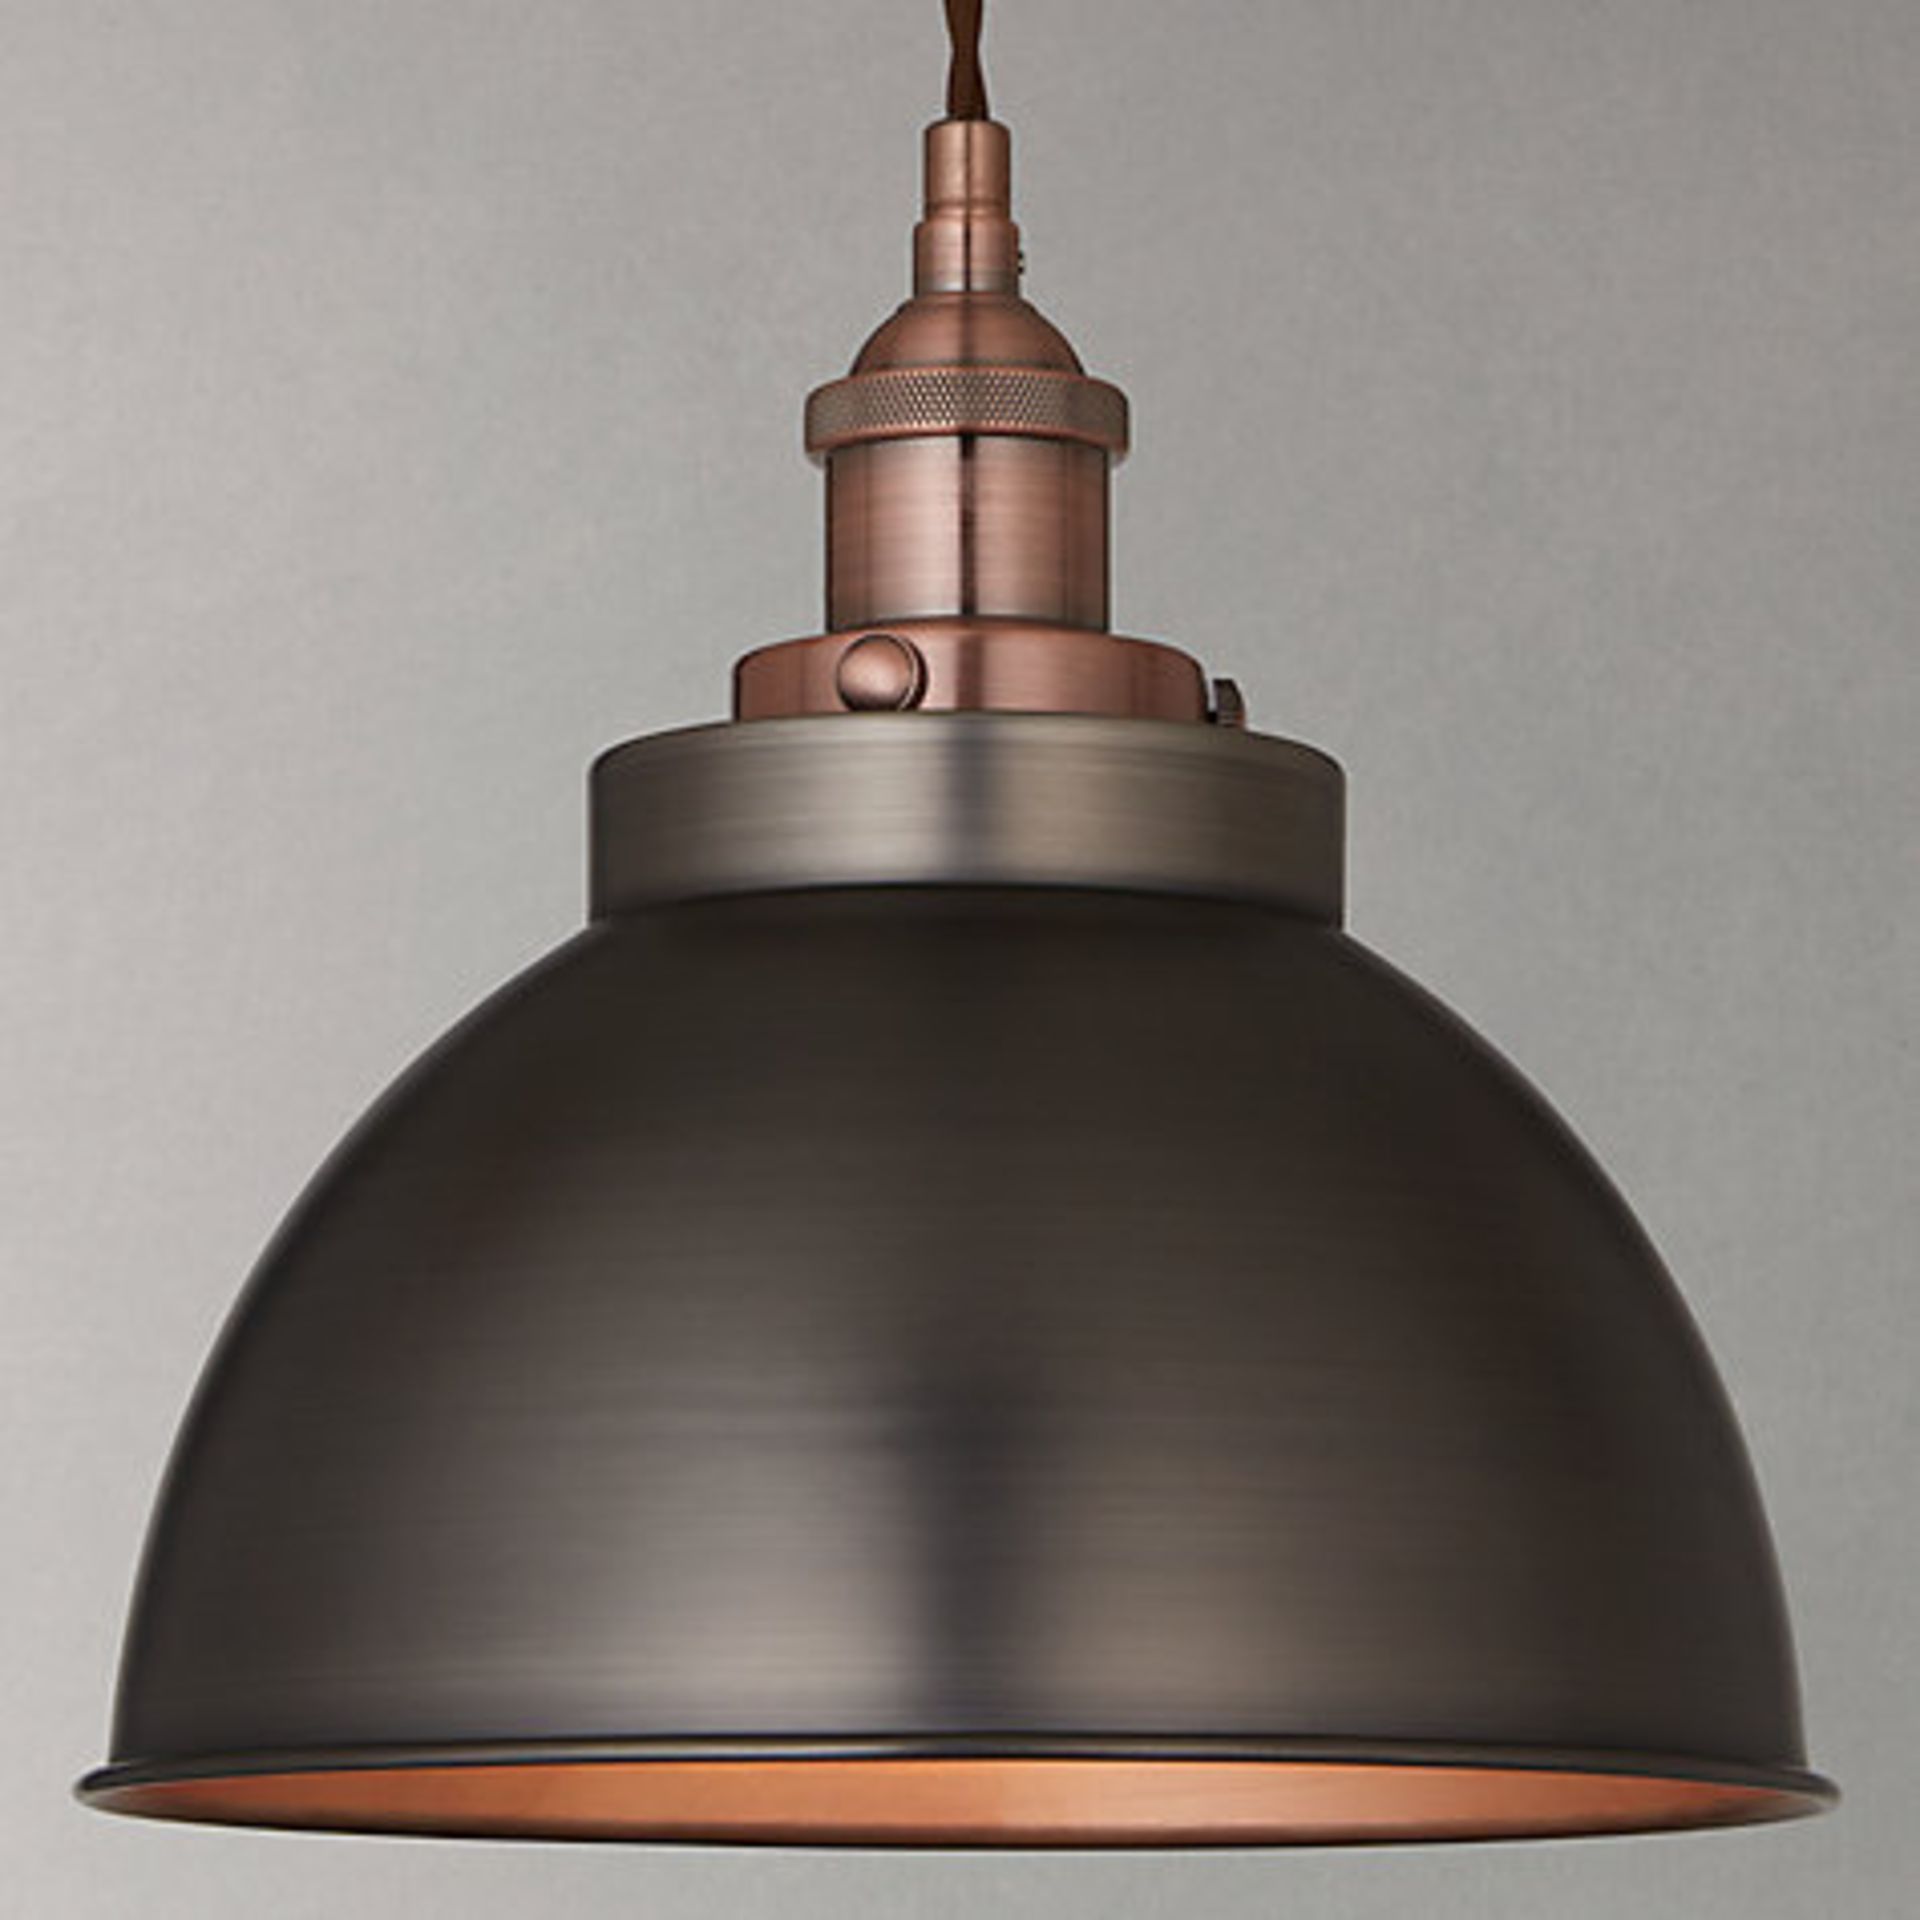 1 x BOXED BALDWIN COPPER FINISH CEILING PENDANT RRP £80 (17.10.17) (3817635) *PLEASE NOTE THAT THE